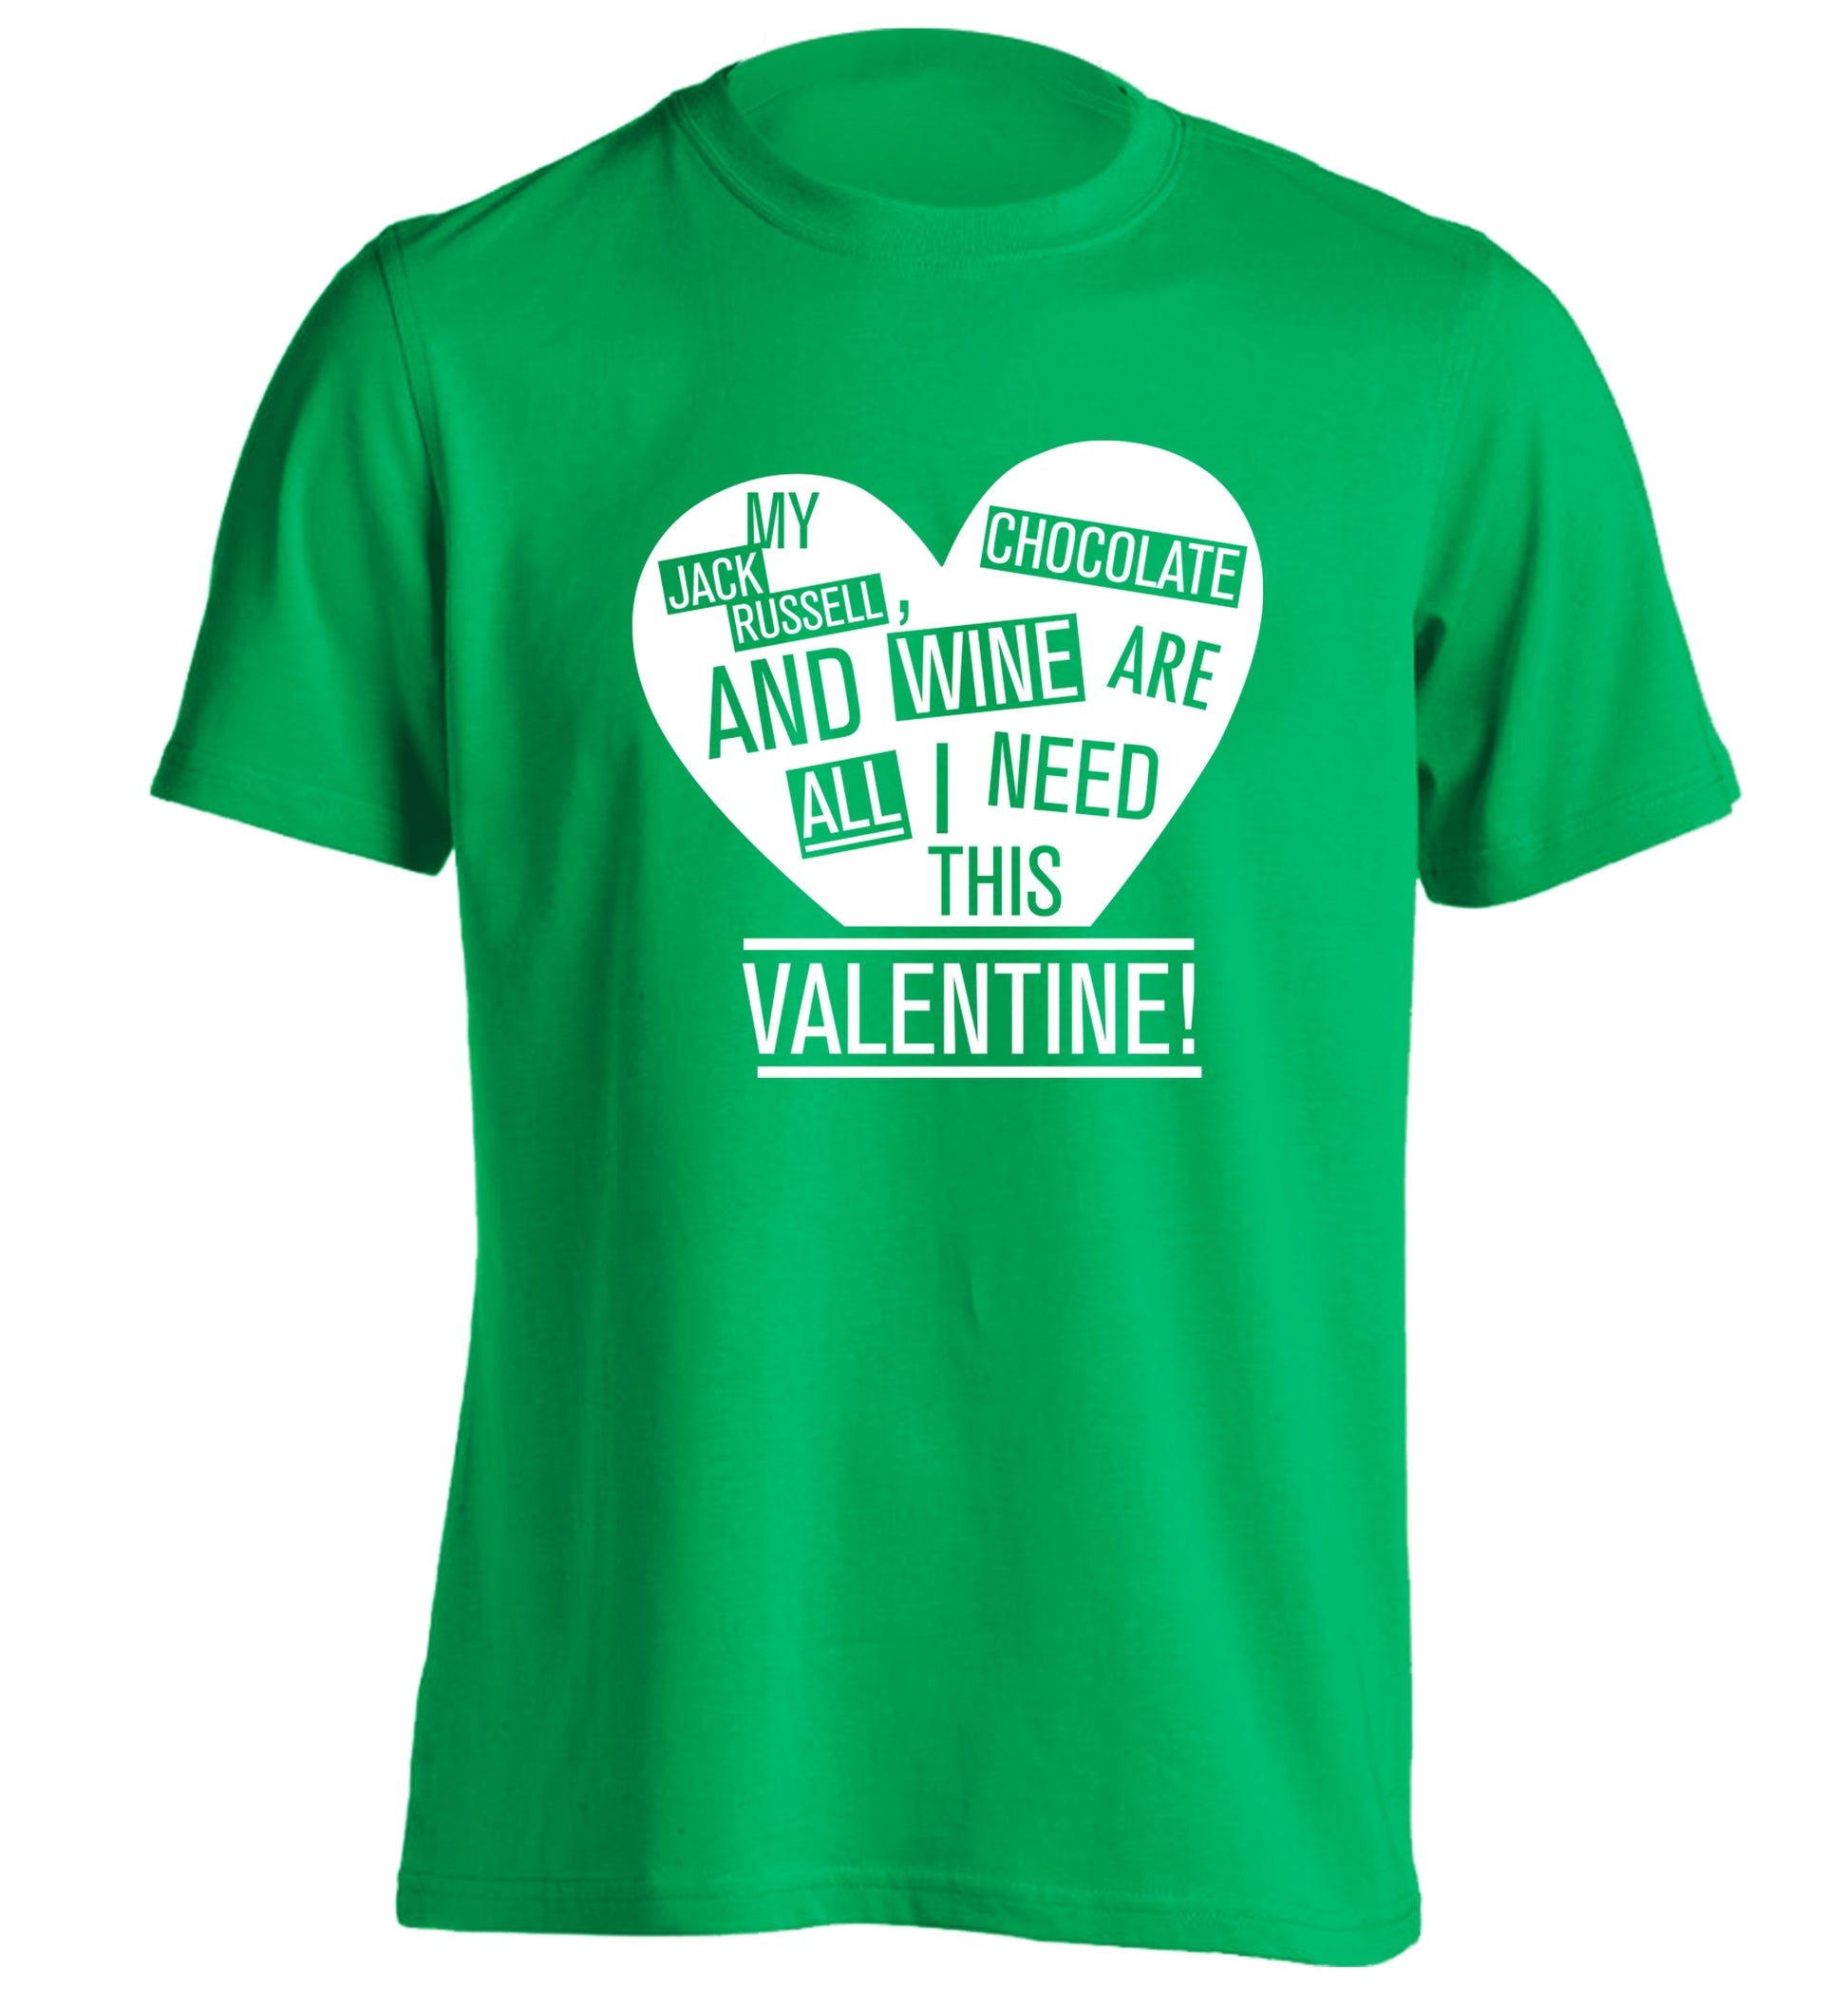 My jack russell, chocolate and wine are all I need this valentine! adults unisex green Tshirt 2XL